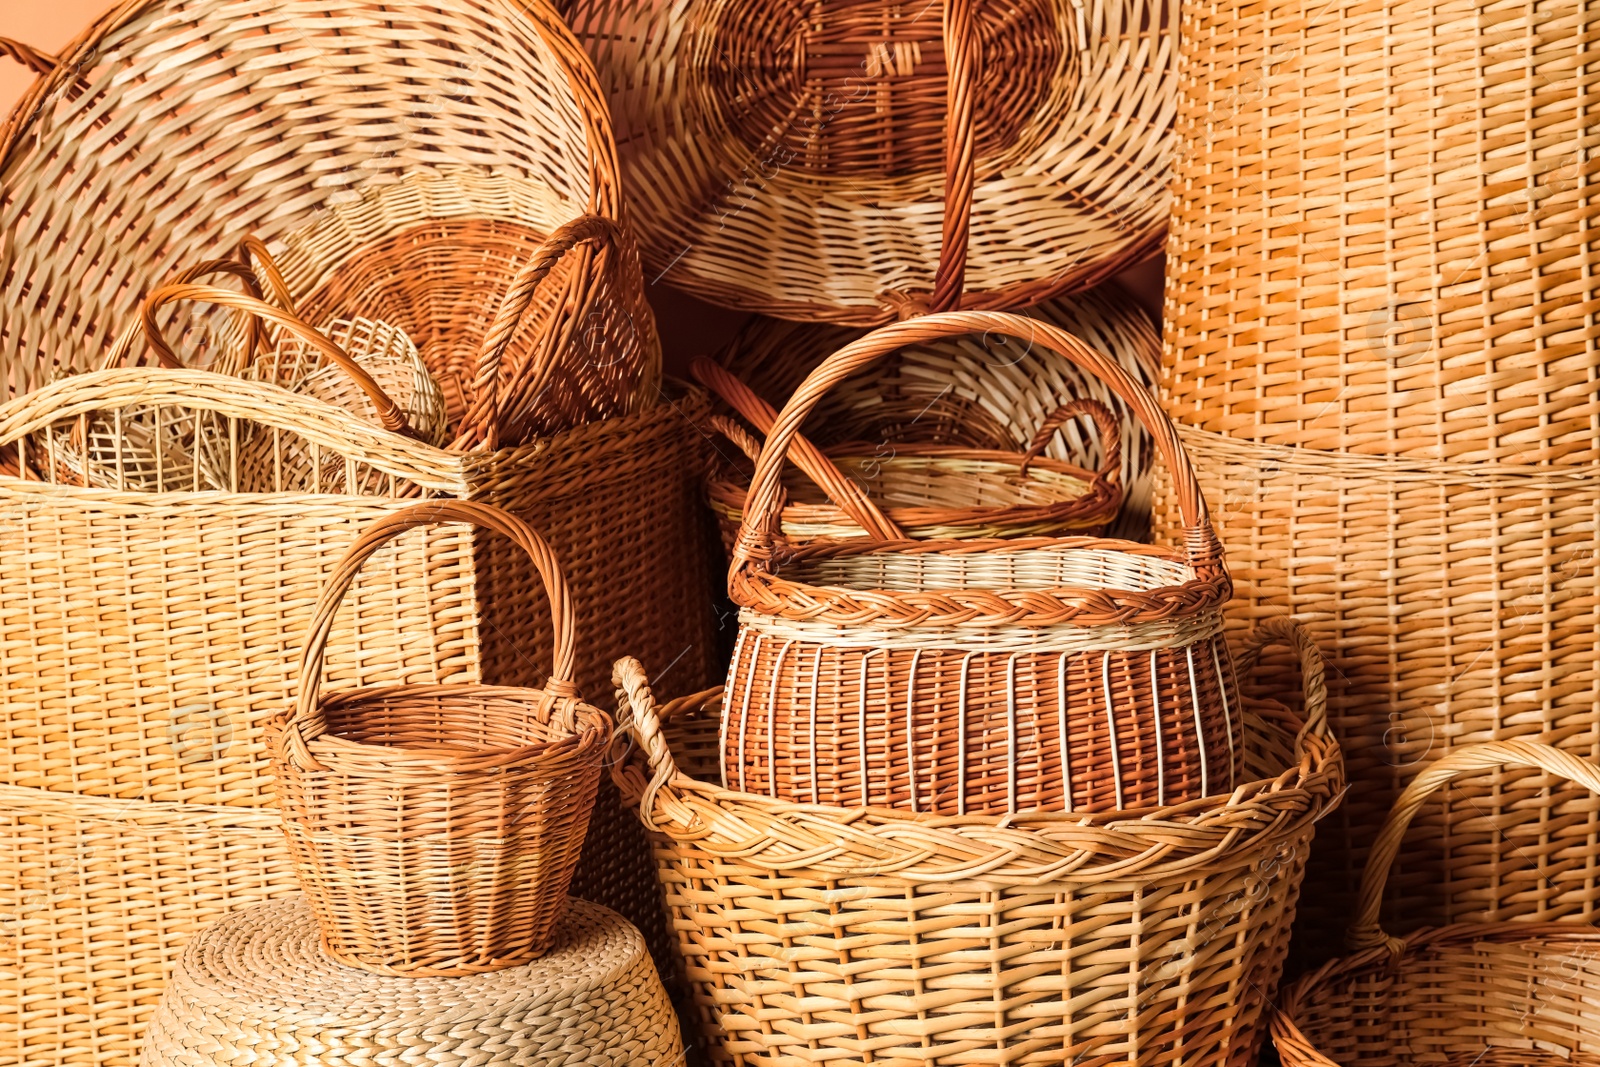 Photo of Many different wicker baskets made of natural material as background